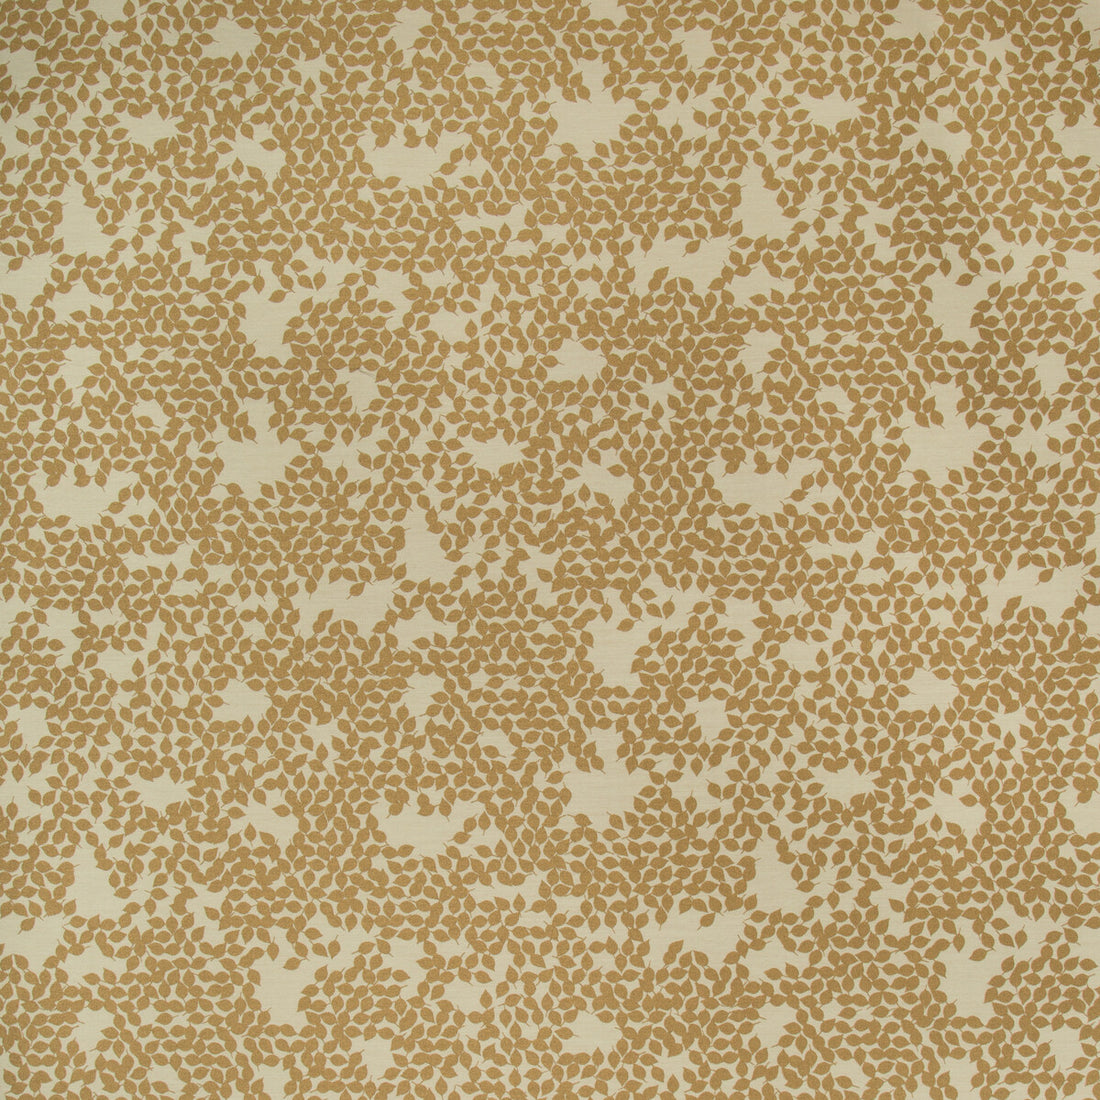 Dancing Leaves fabric in gold color - pattern 35091.4.0 - by Kravet Contract in the Gis Crypton collection